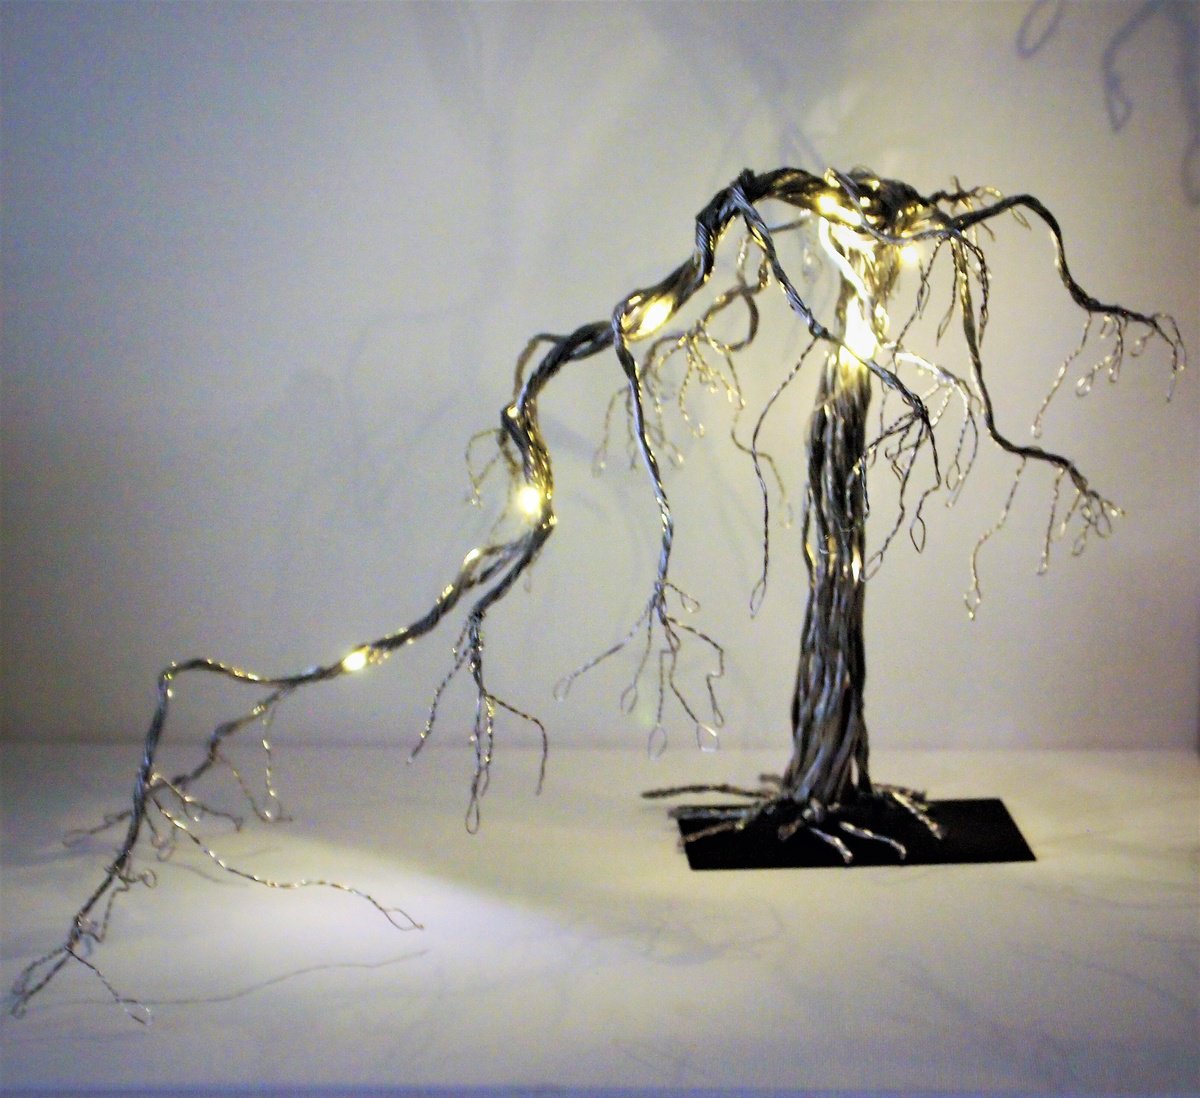 Silver & Copper wire, Mangrove tree sculpture with LED lights by Steph Morgan